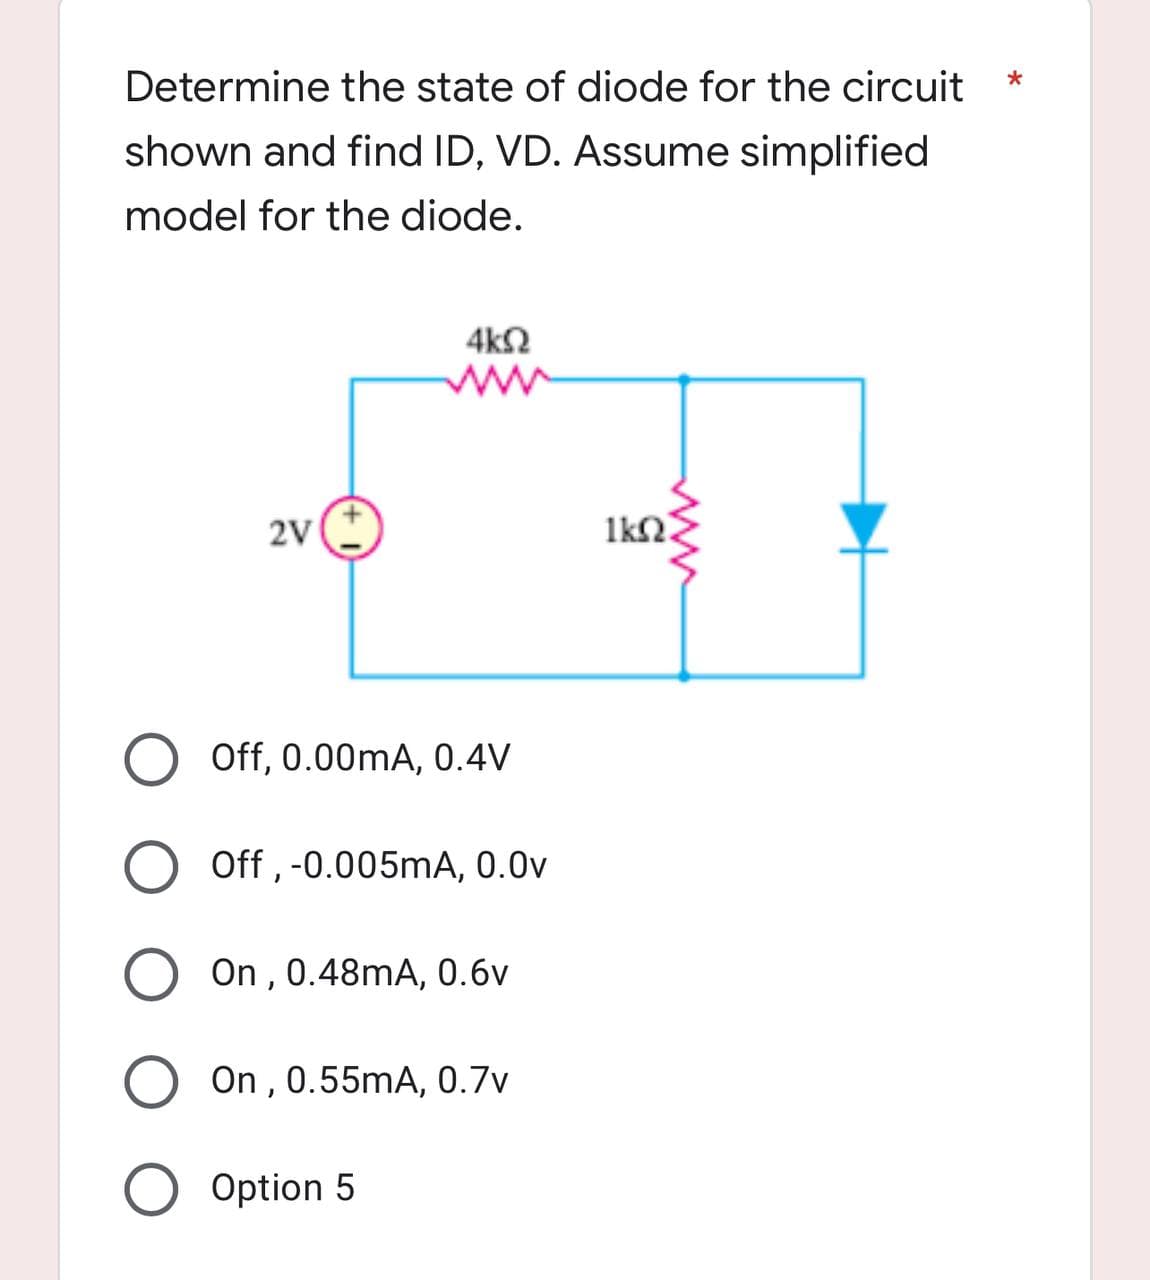 Determine the state of diode for the circuit
*
shown and find ID, VD. Assume simplified
model for the diode.
4ΚΩ
2V
O Off, 0.00mA, 0.4V
O Off, -0.005mA, 0.0v
On, 0.48mA, 0.6v
On, 0.55mA, 0.7v
O Option 5
1k02.